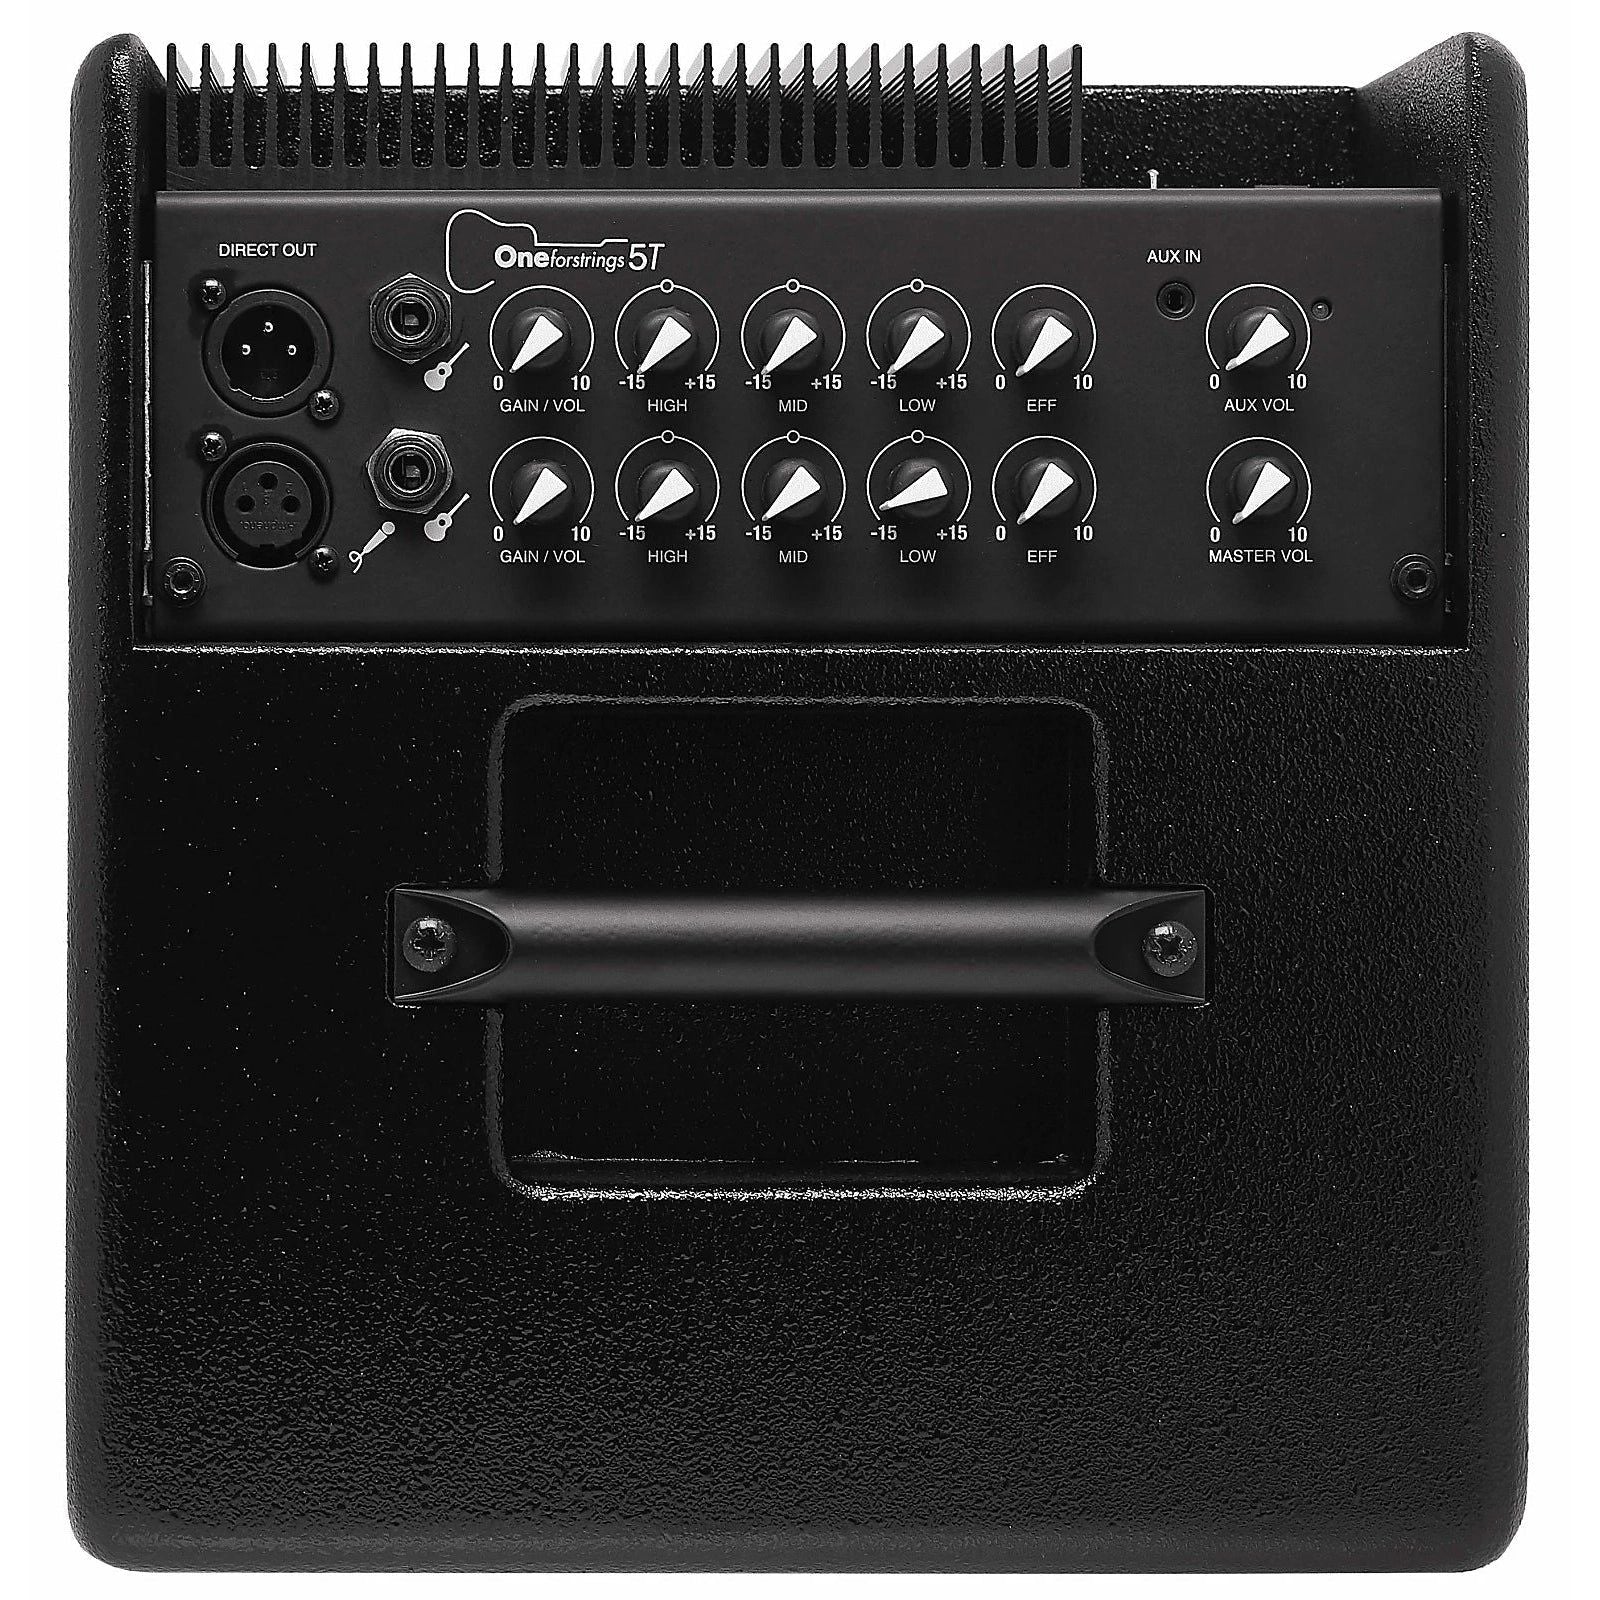 Amplifier Acus One Forstrings 5T Simon, Combo - Việt Music